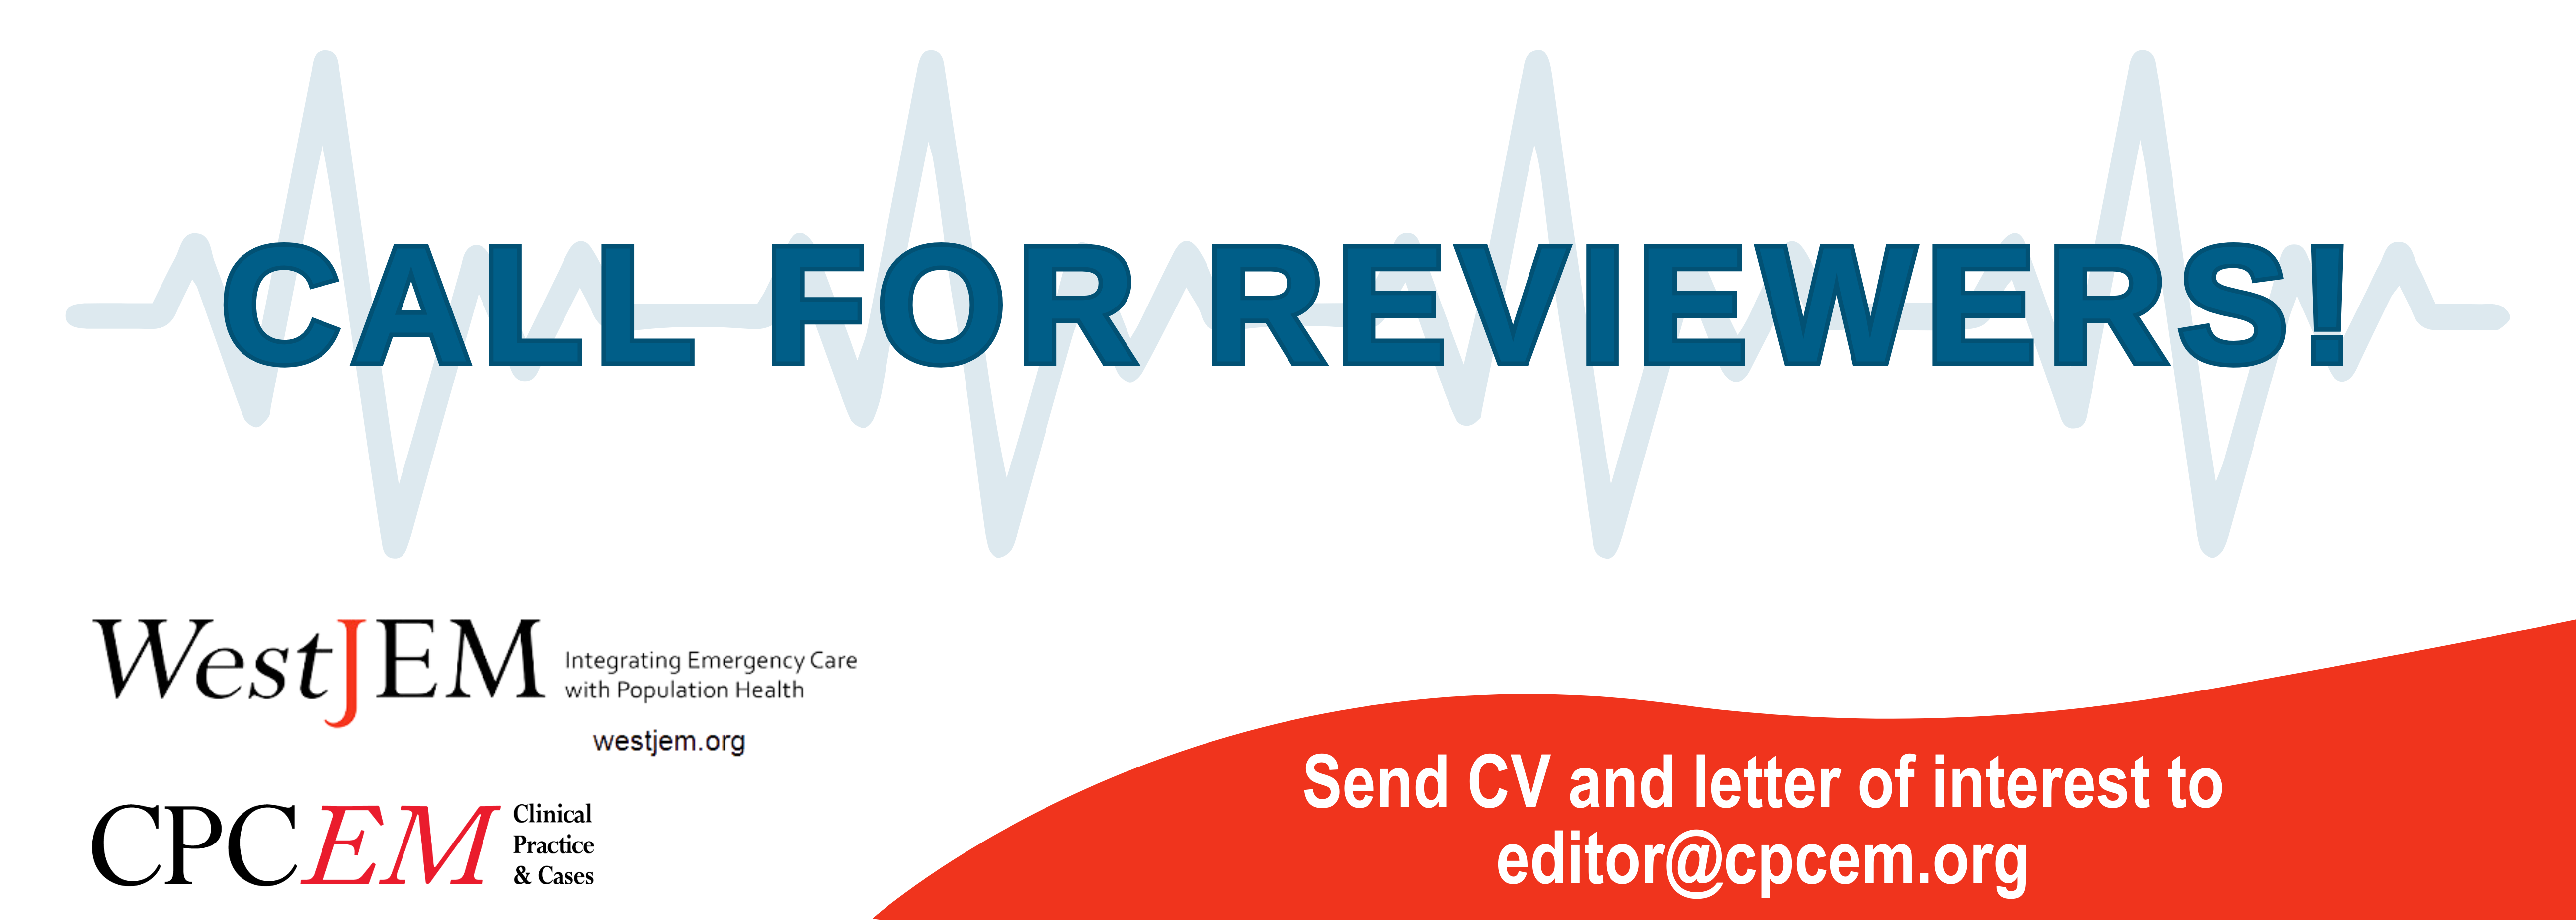 Call-for-Reviewers-New-1